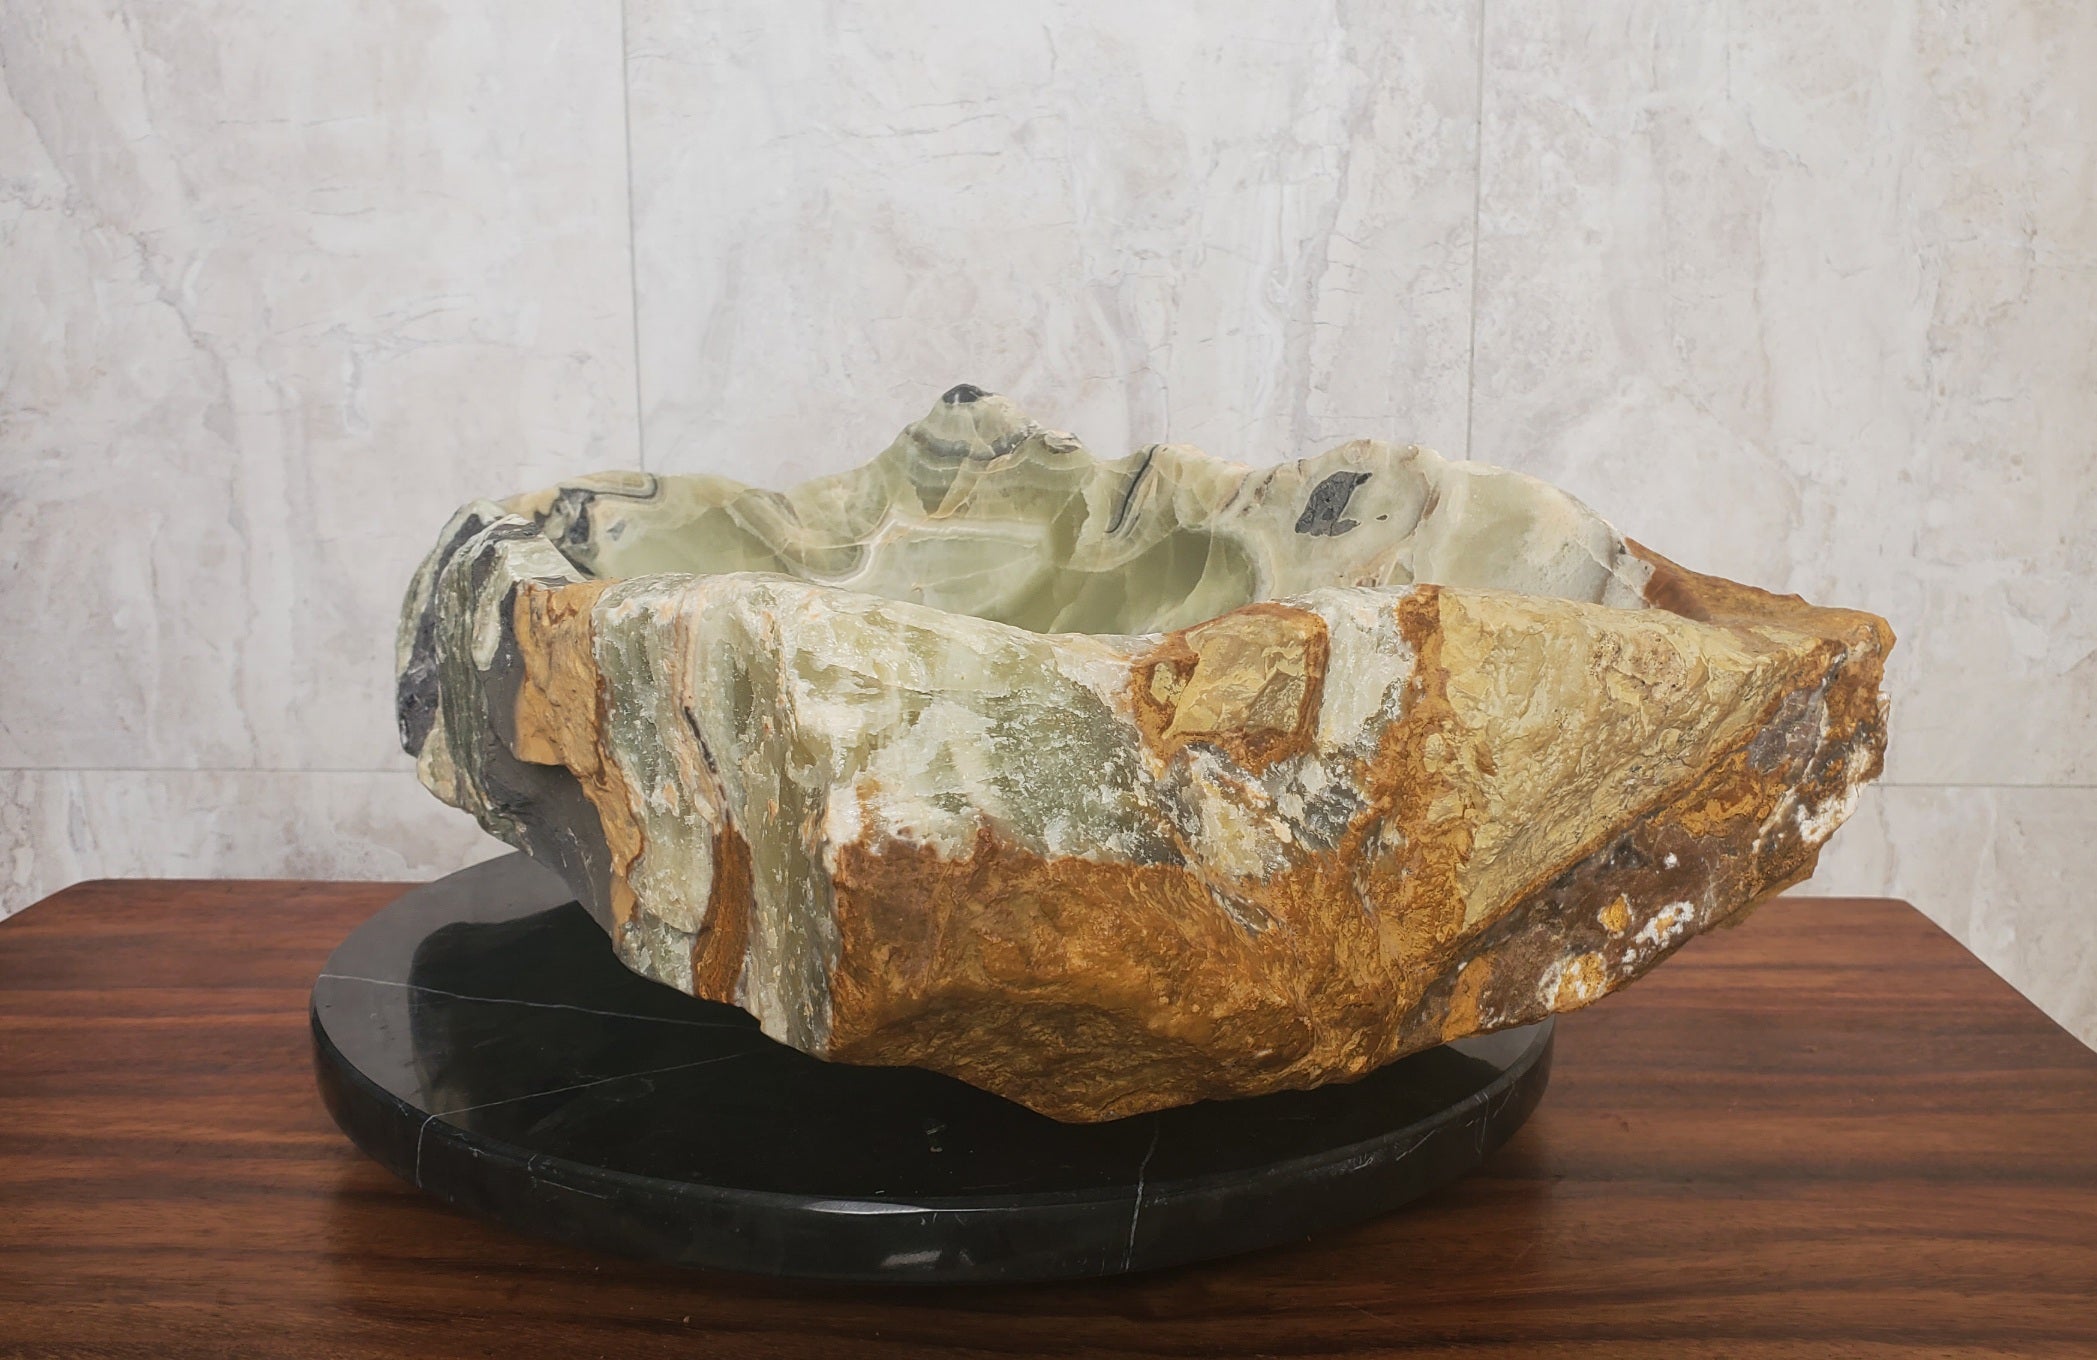 Green Brown Tan and White Onyx Stone Vessel Bathroom Sink. Above Counter Sink. Handmade in Mexico. Ships from the USA. Buy now at www.felipeandgrace.com. 